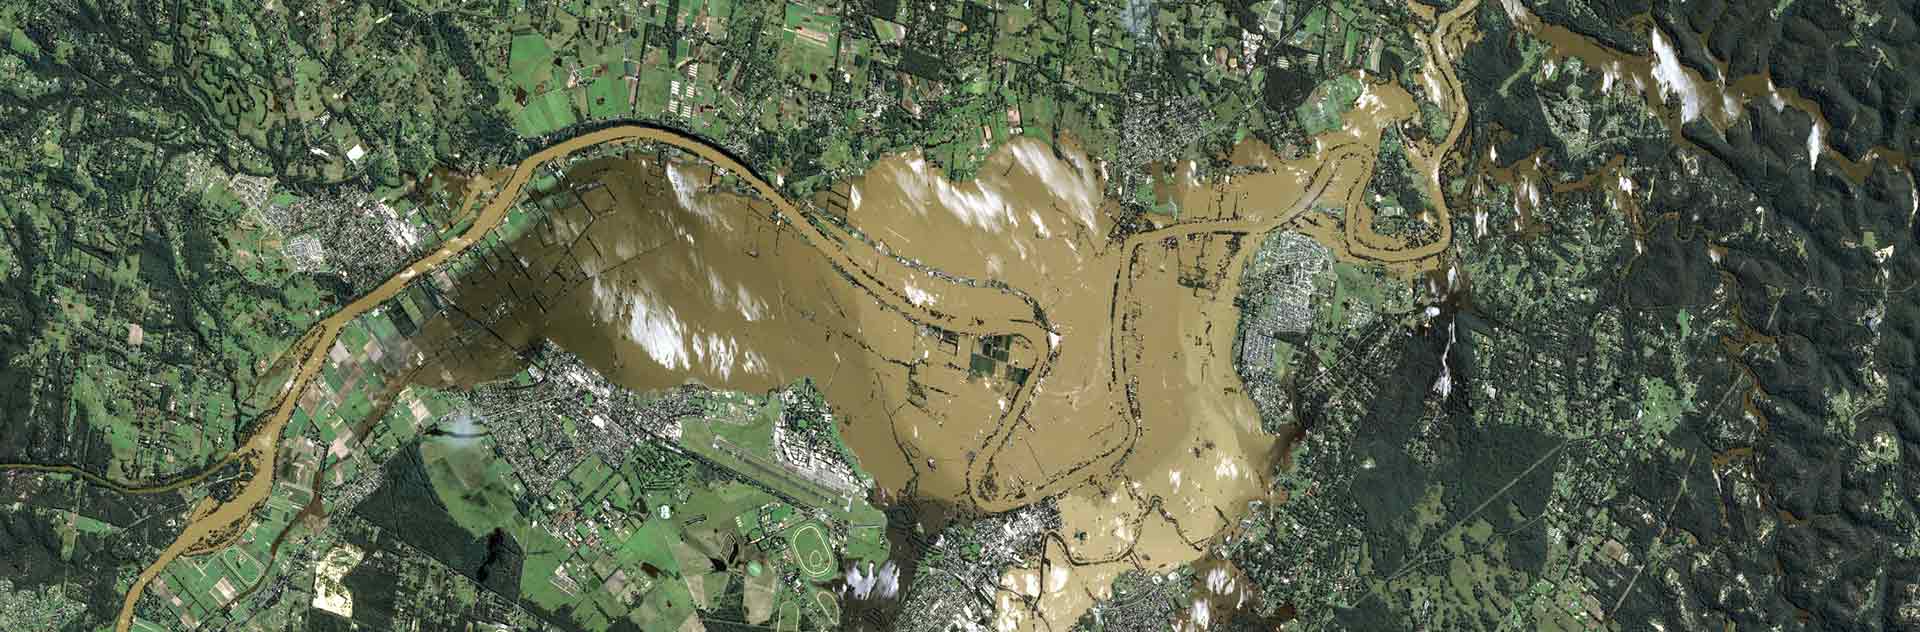 Hawkesbury River Valley floods in New South Wales, Australia on 24 March 2021